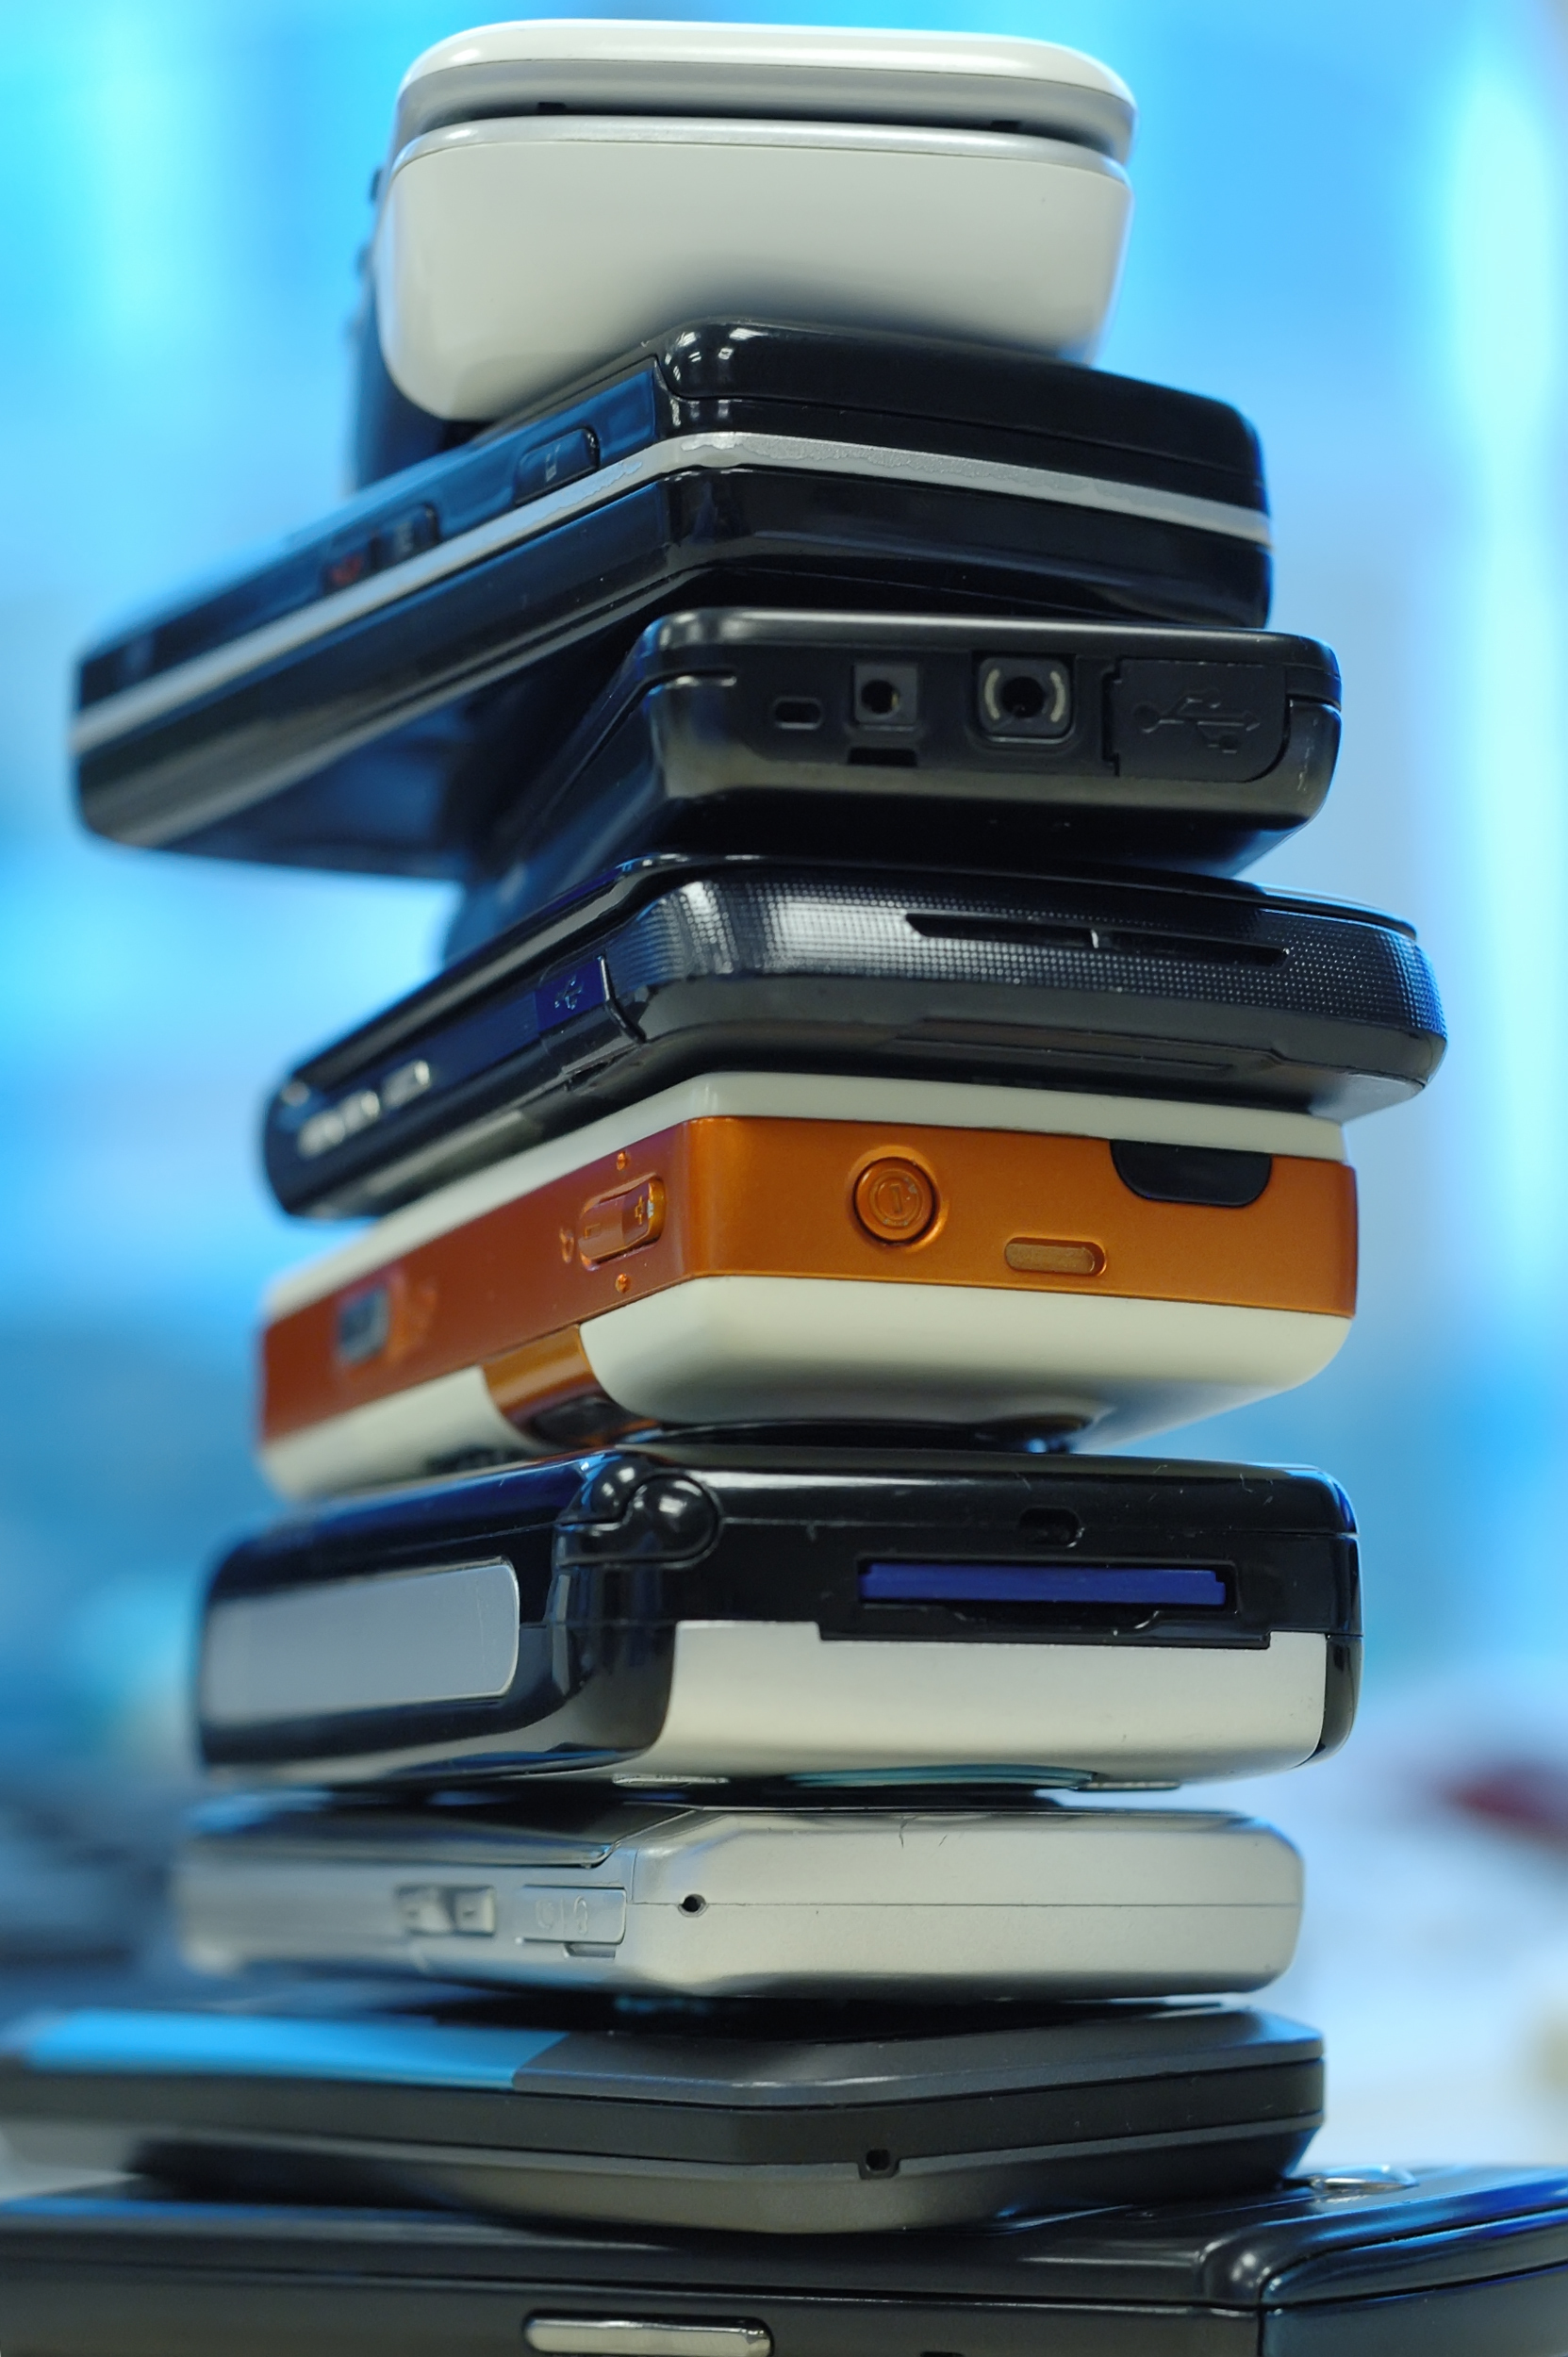 Stack of Cell Phones